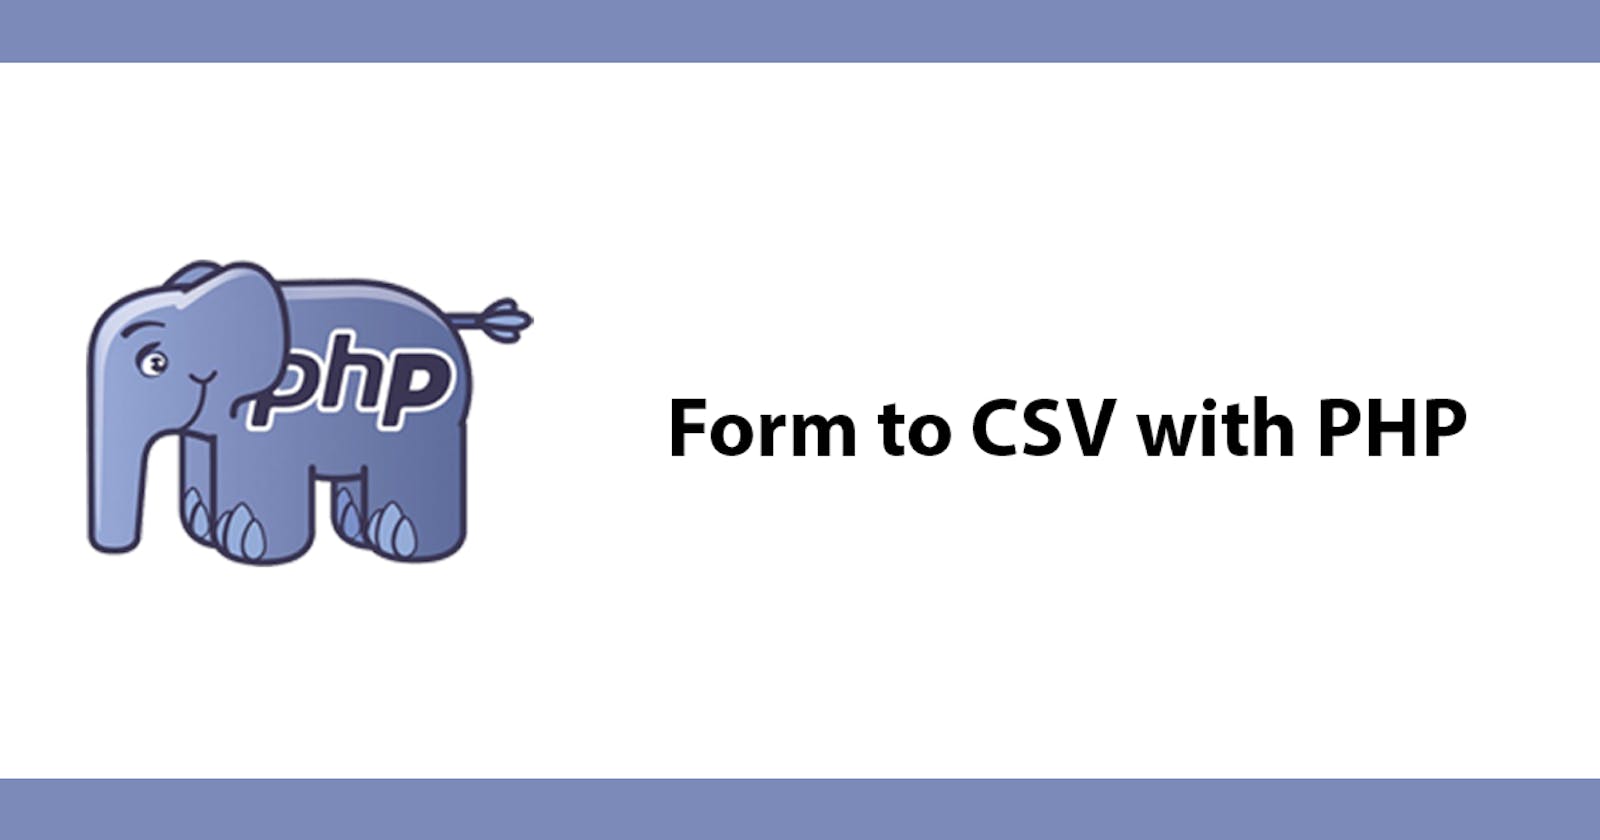 Form to CSV with PHP